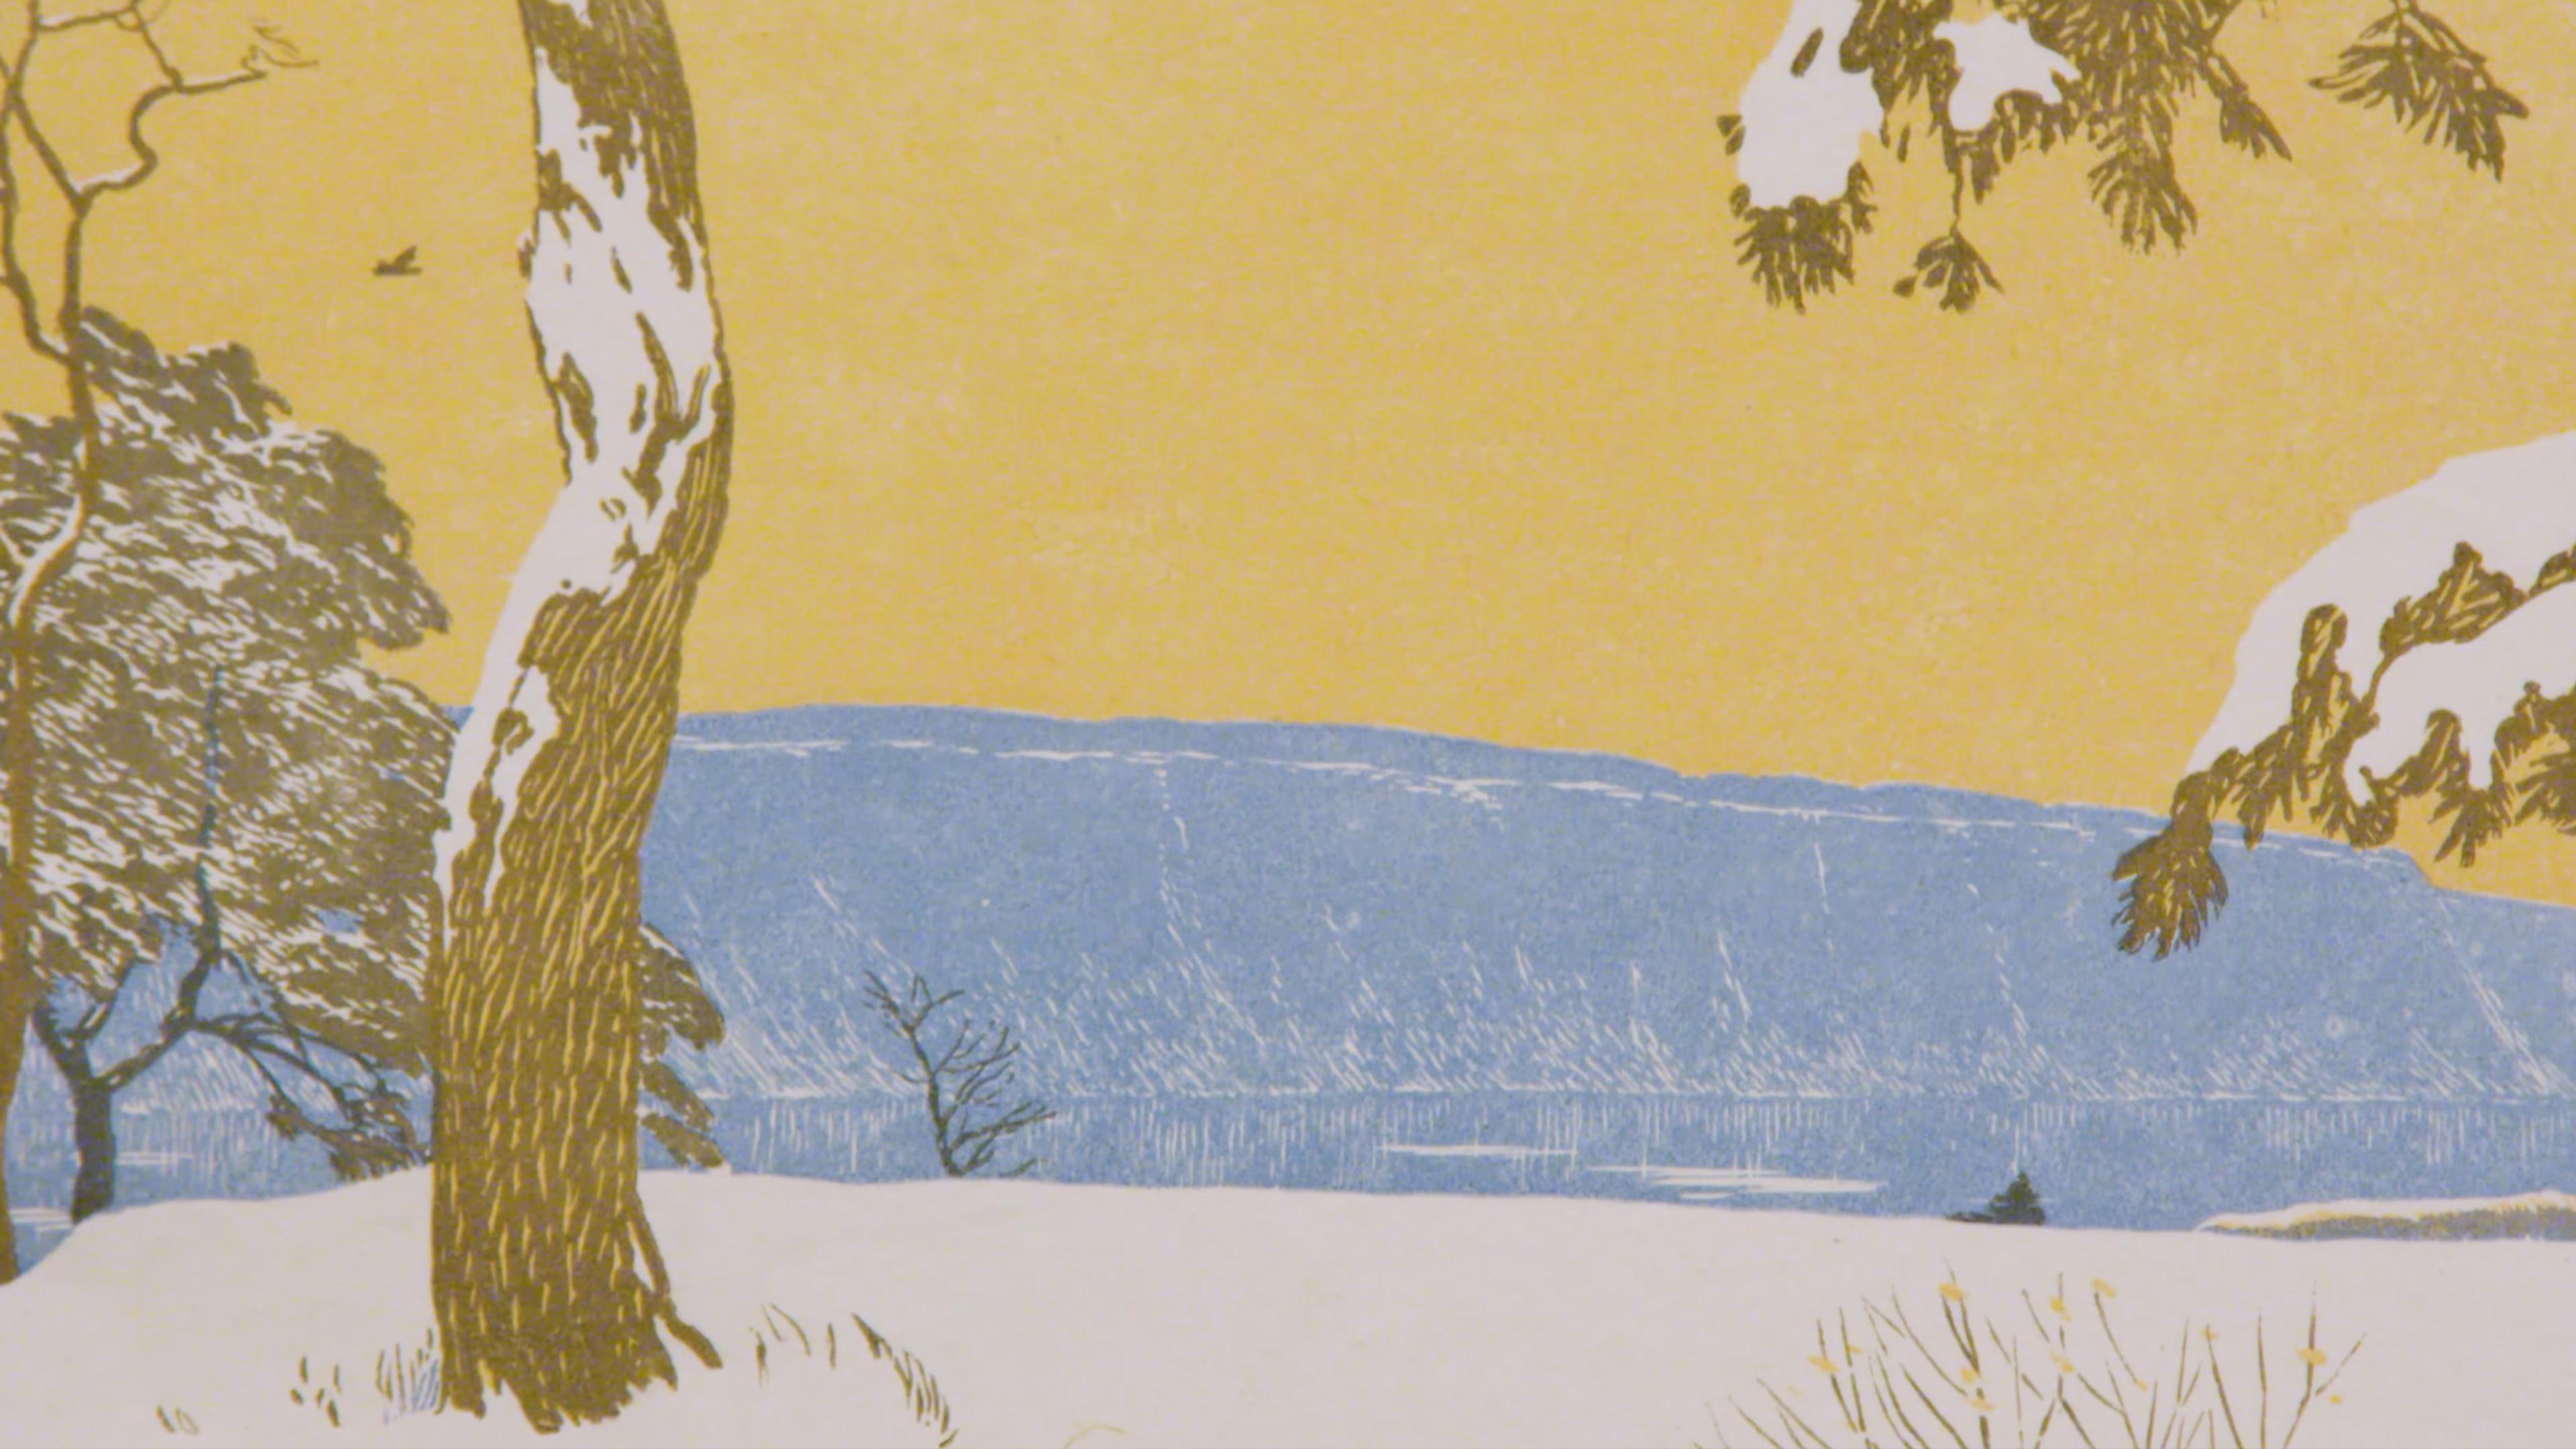 A serene landscape of snowy trees and hills set against a backdrop of a yellow sky and blue mountain range. A bird can be seen flying near the edge of a tall tree on the left, and snow-covered branches frame the scene on the right.